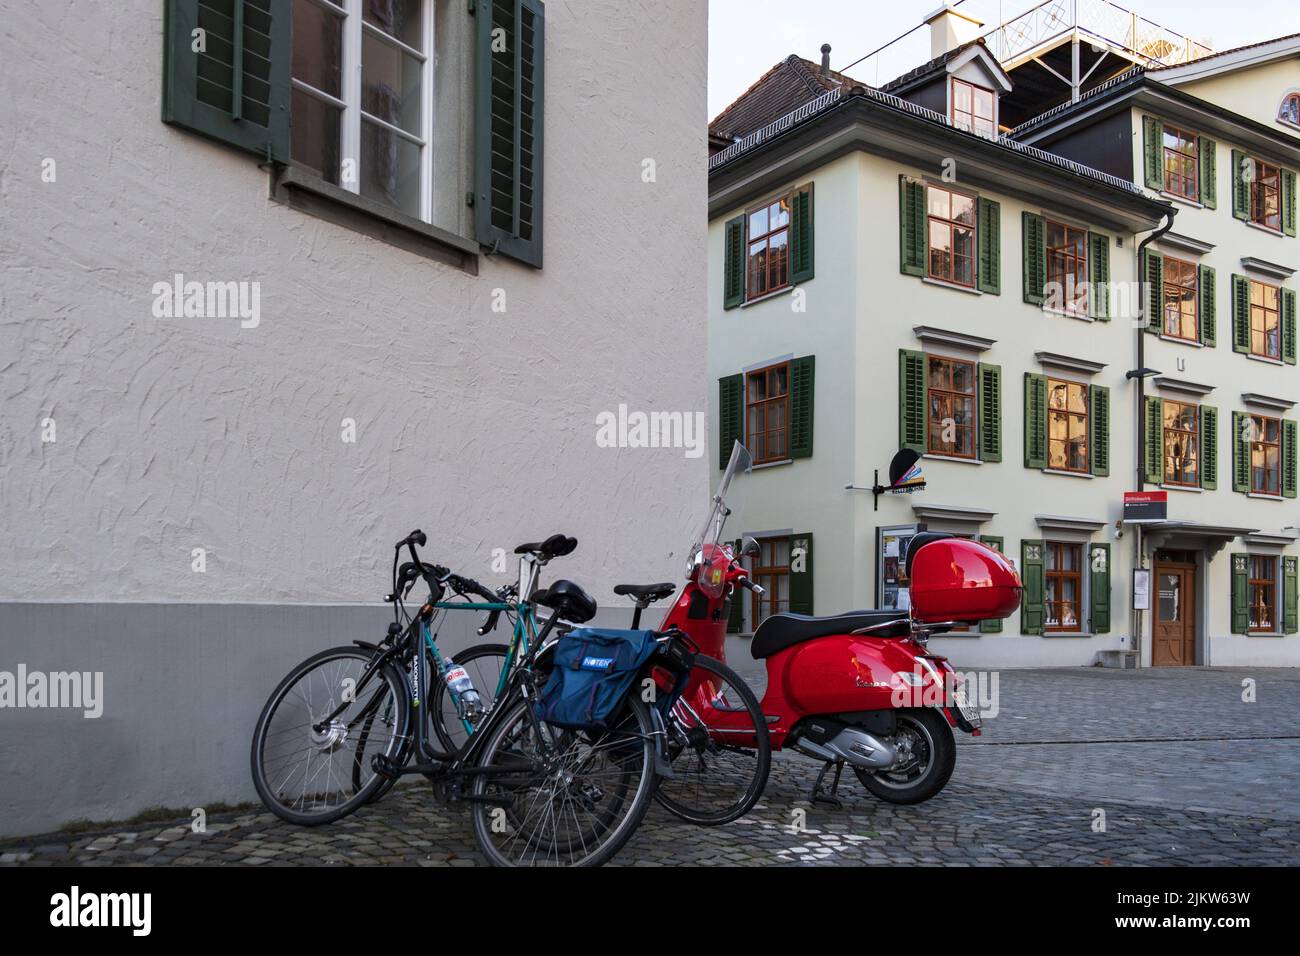 A blue bicycle and red moped on the street of Saint Gallen, Switzerland Stock Photo